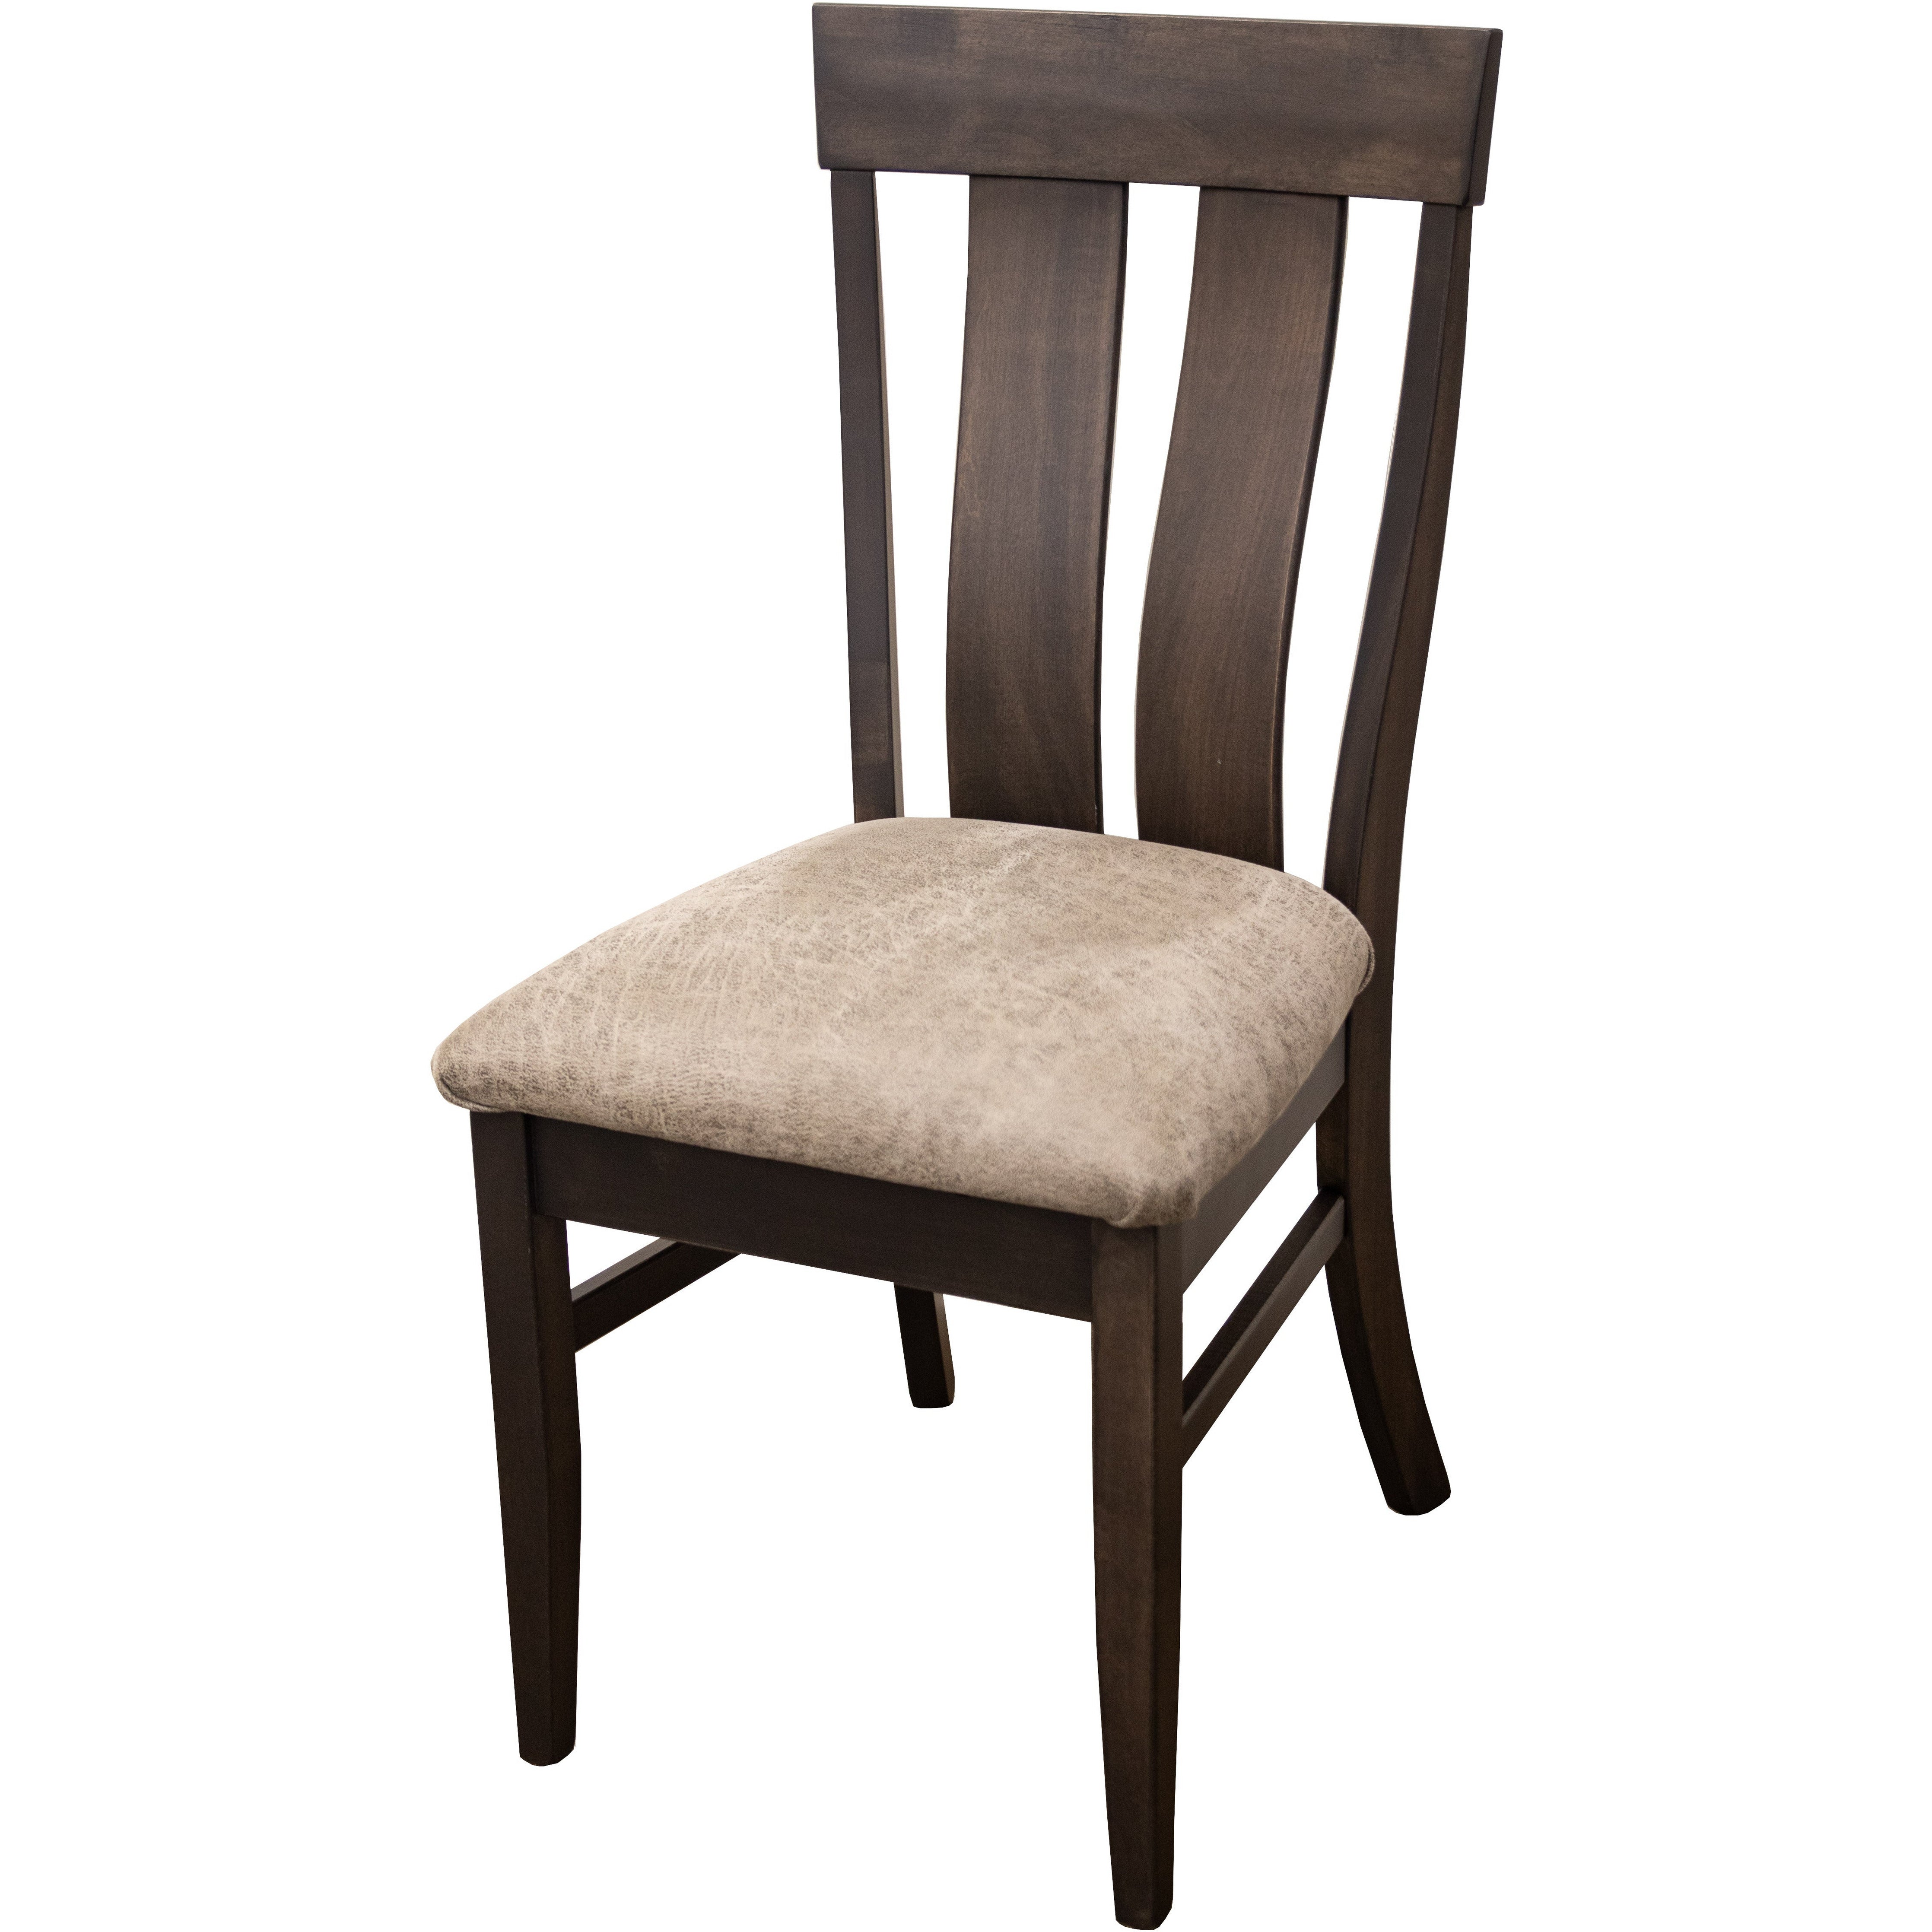 Kinglet Side Chair with Faux Leather Seat